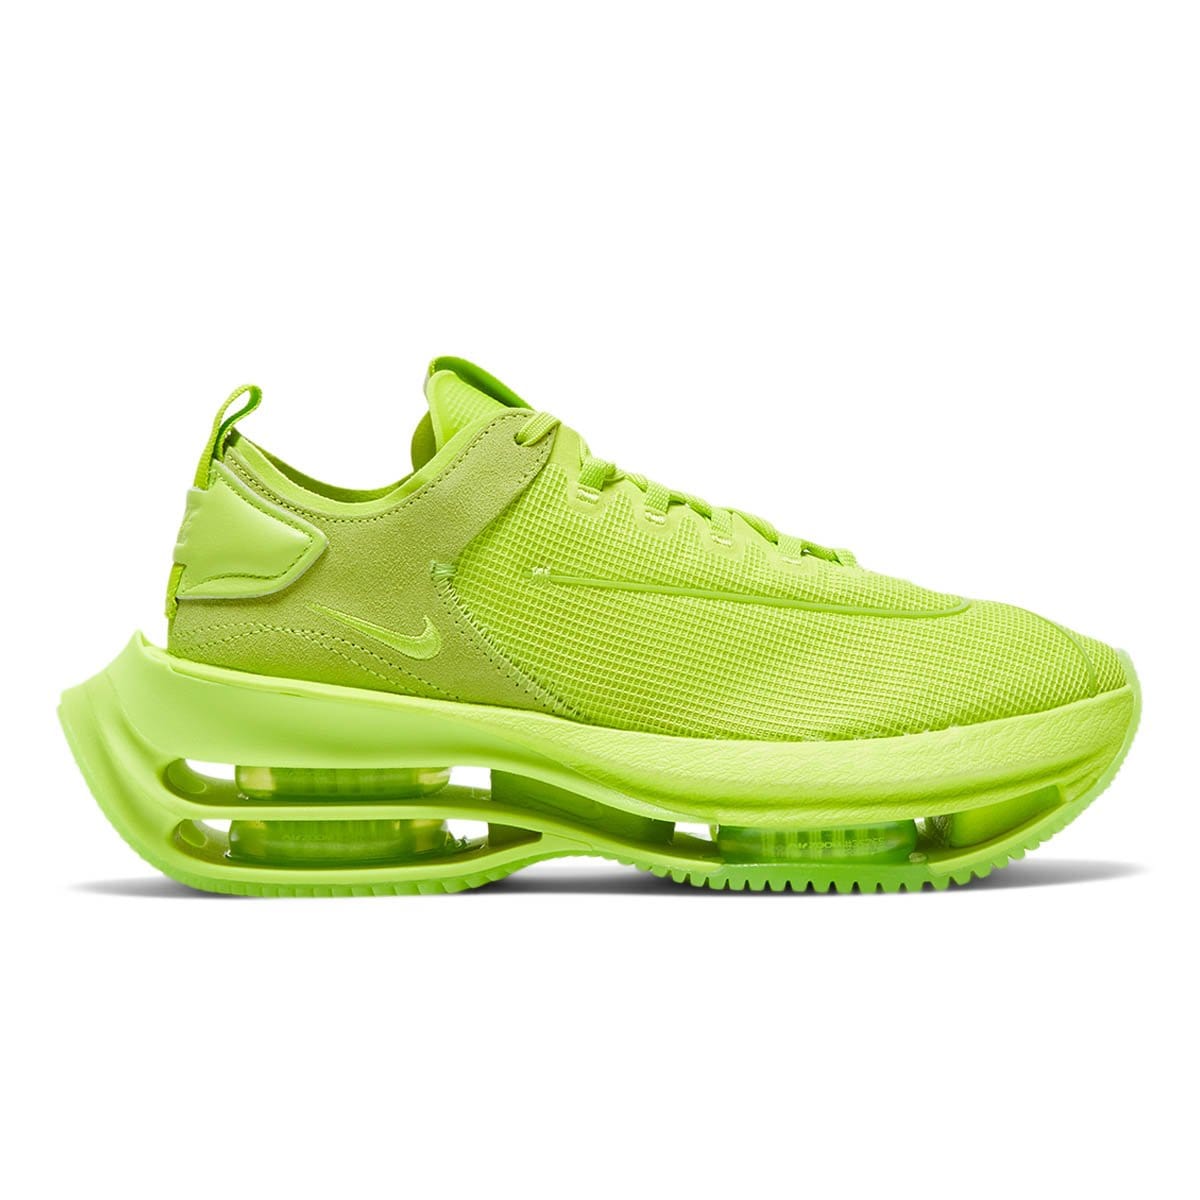 Nike Shoes WOMEN'S ZOOM DOUBLE STACKED